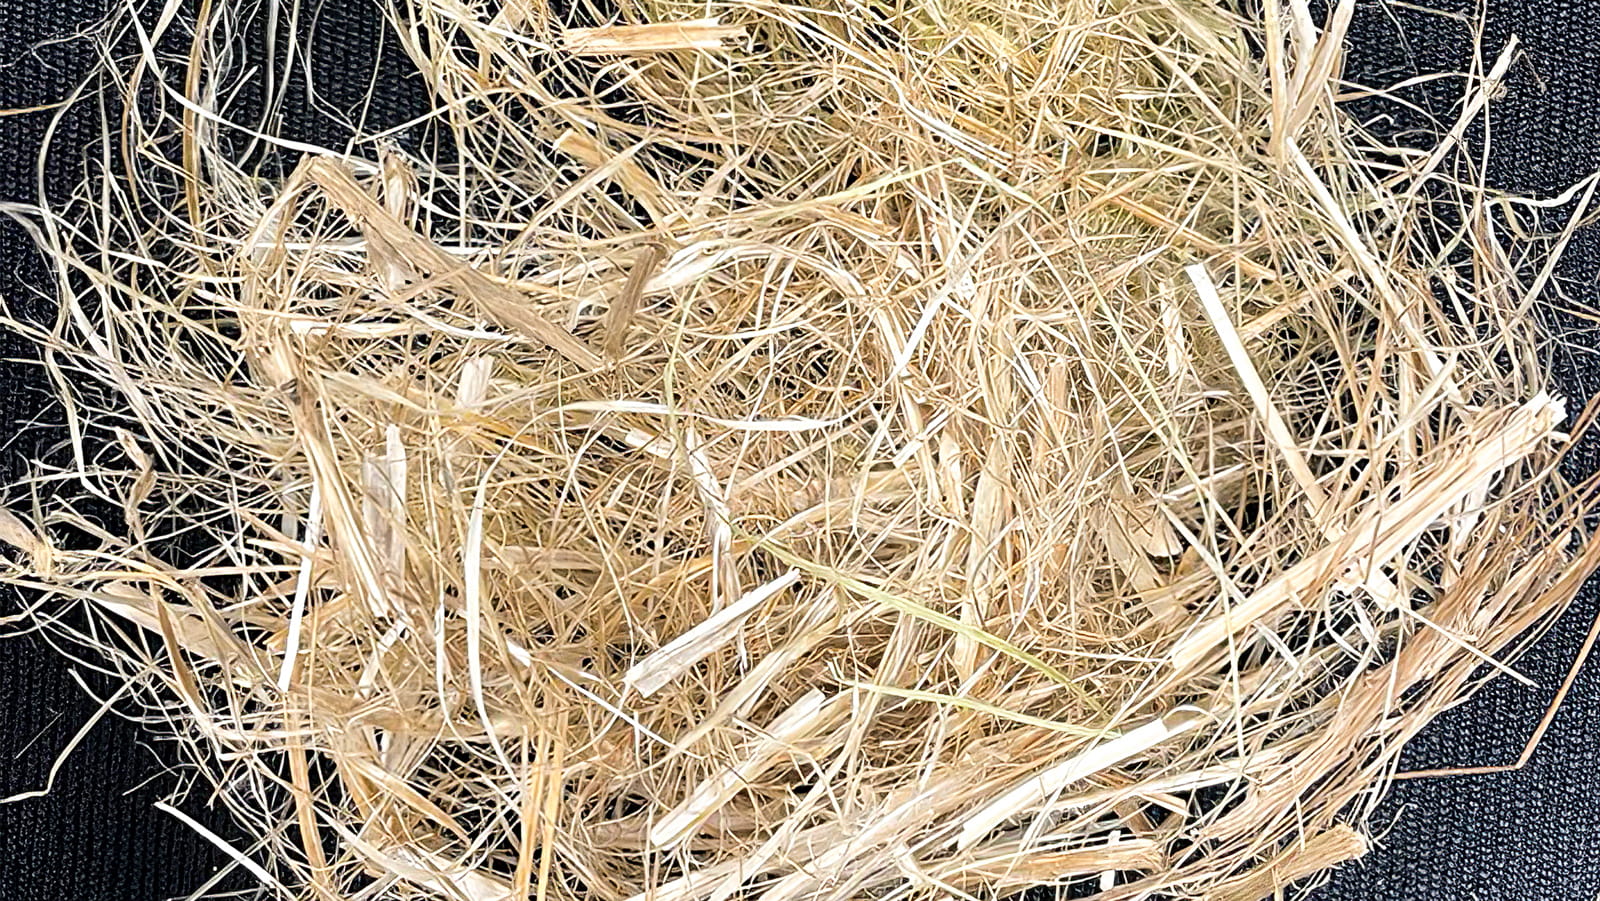 A new University of Alberta project is exploring how to turn hemp straw into economic gold, in the form of Canadian-made, environmentally-friendly fibres that can be used for everything from dental floss to workwear. (Photo: Supplied)